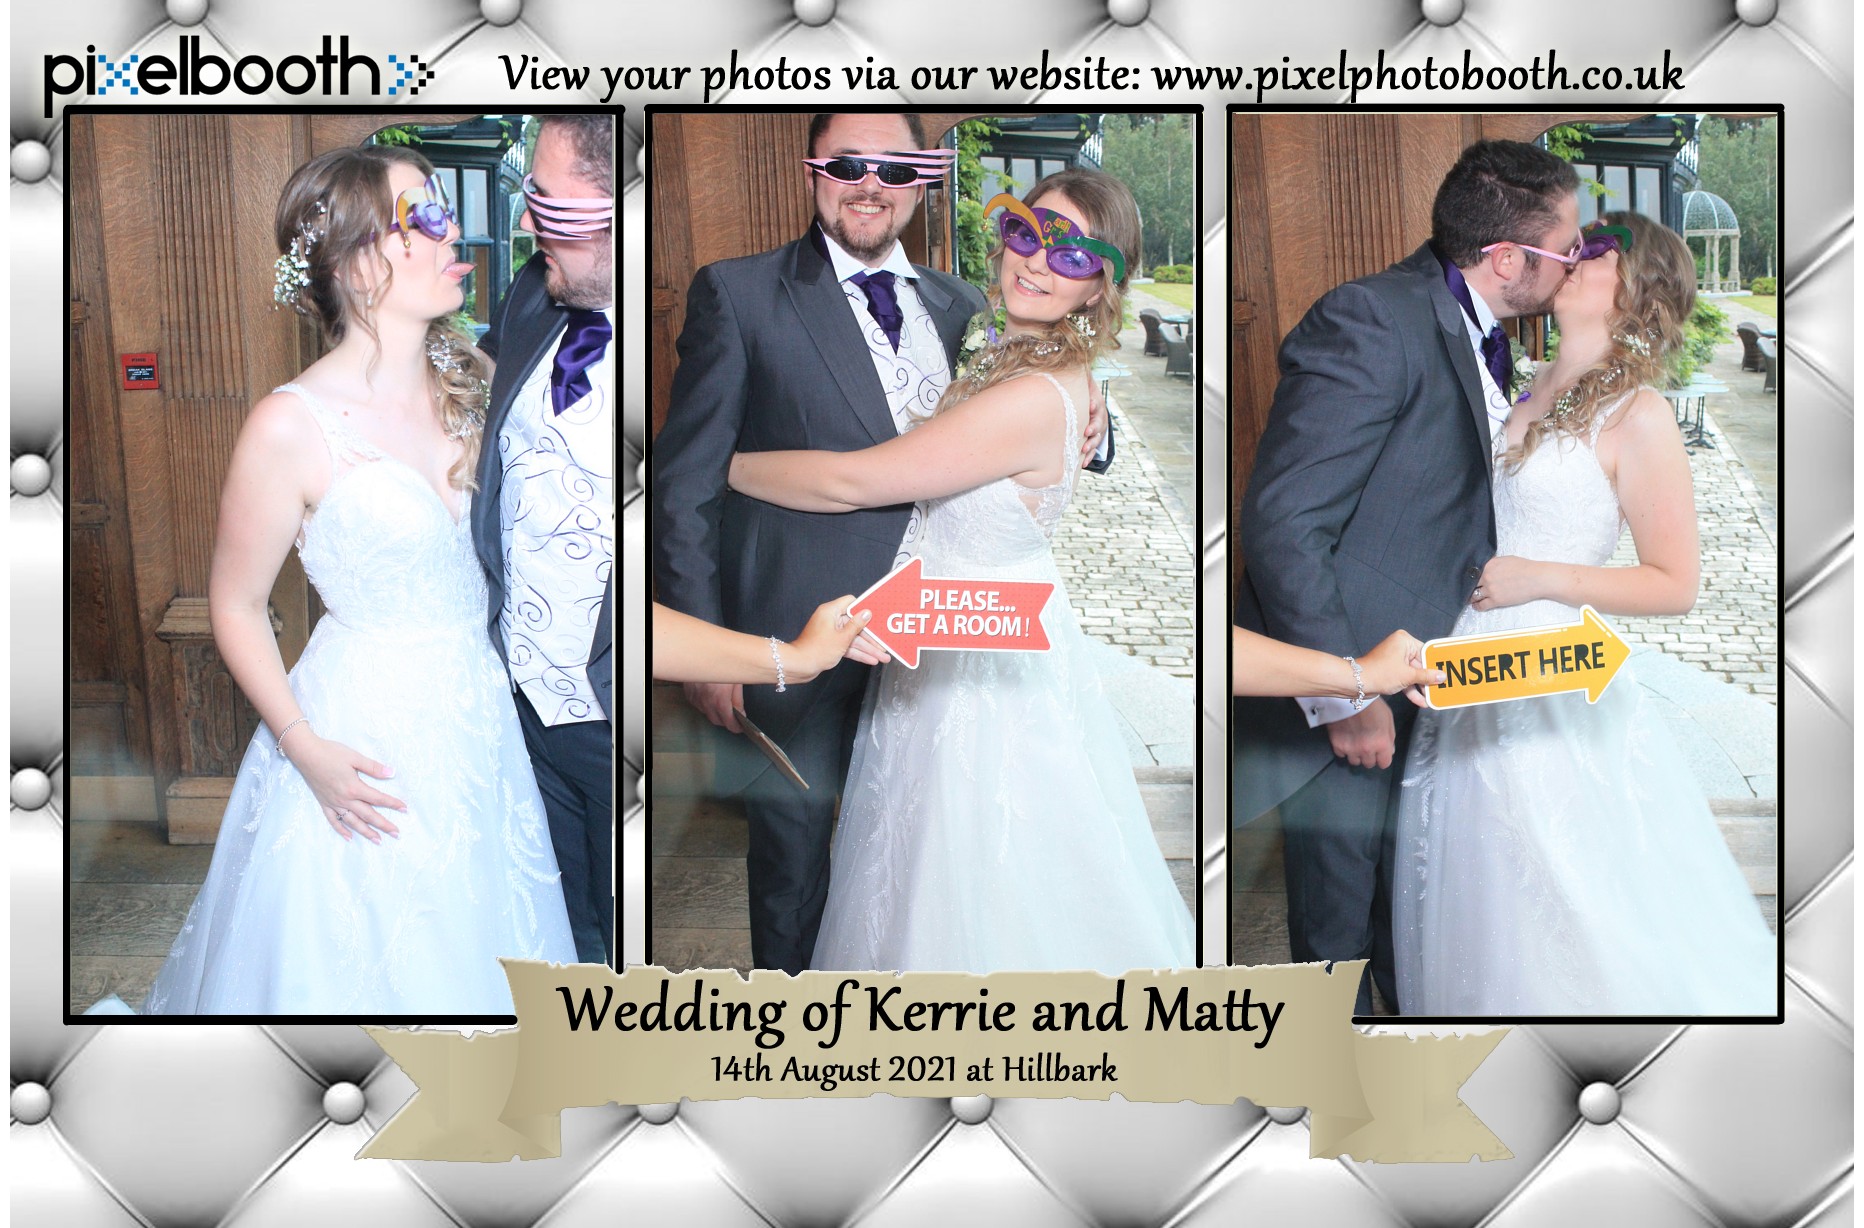 14th August 2021: Kerrie and Matty's Wedding at Hillbark Hotel